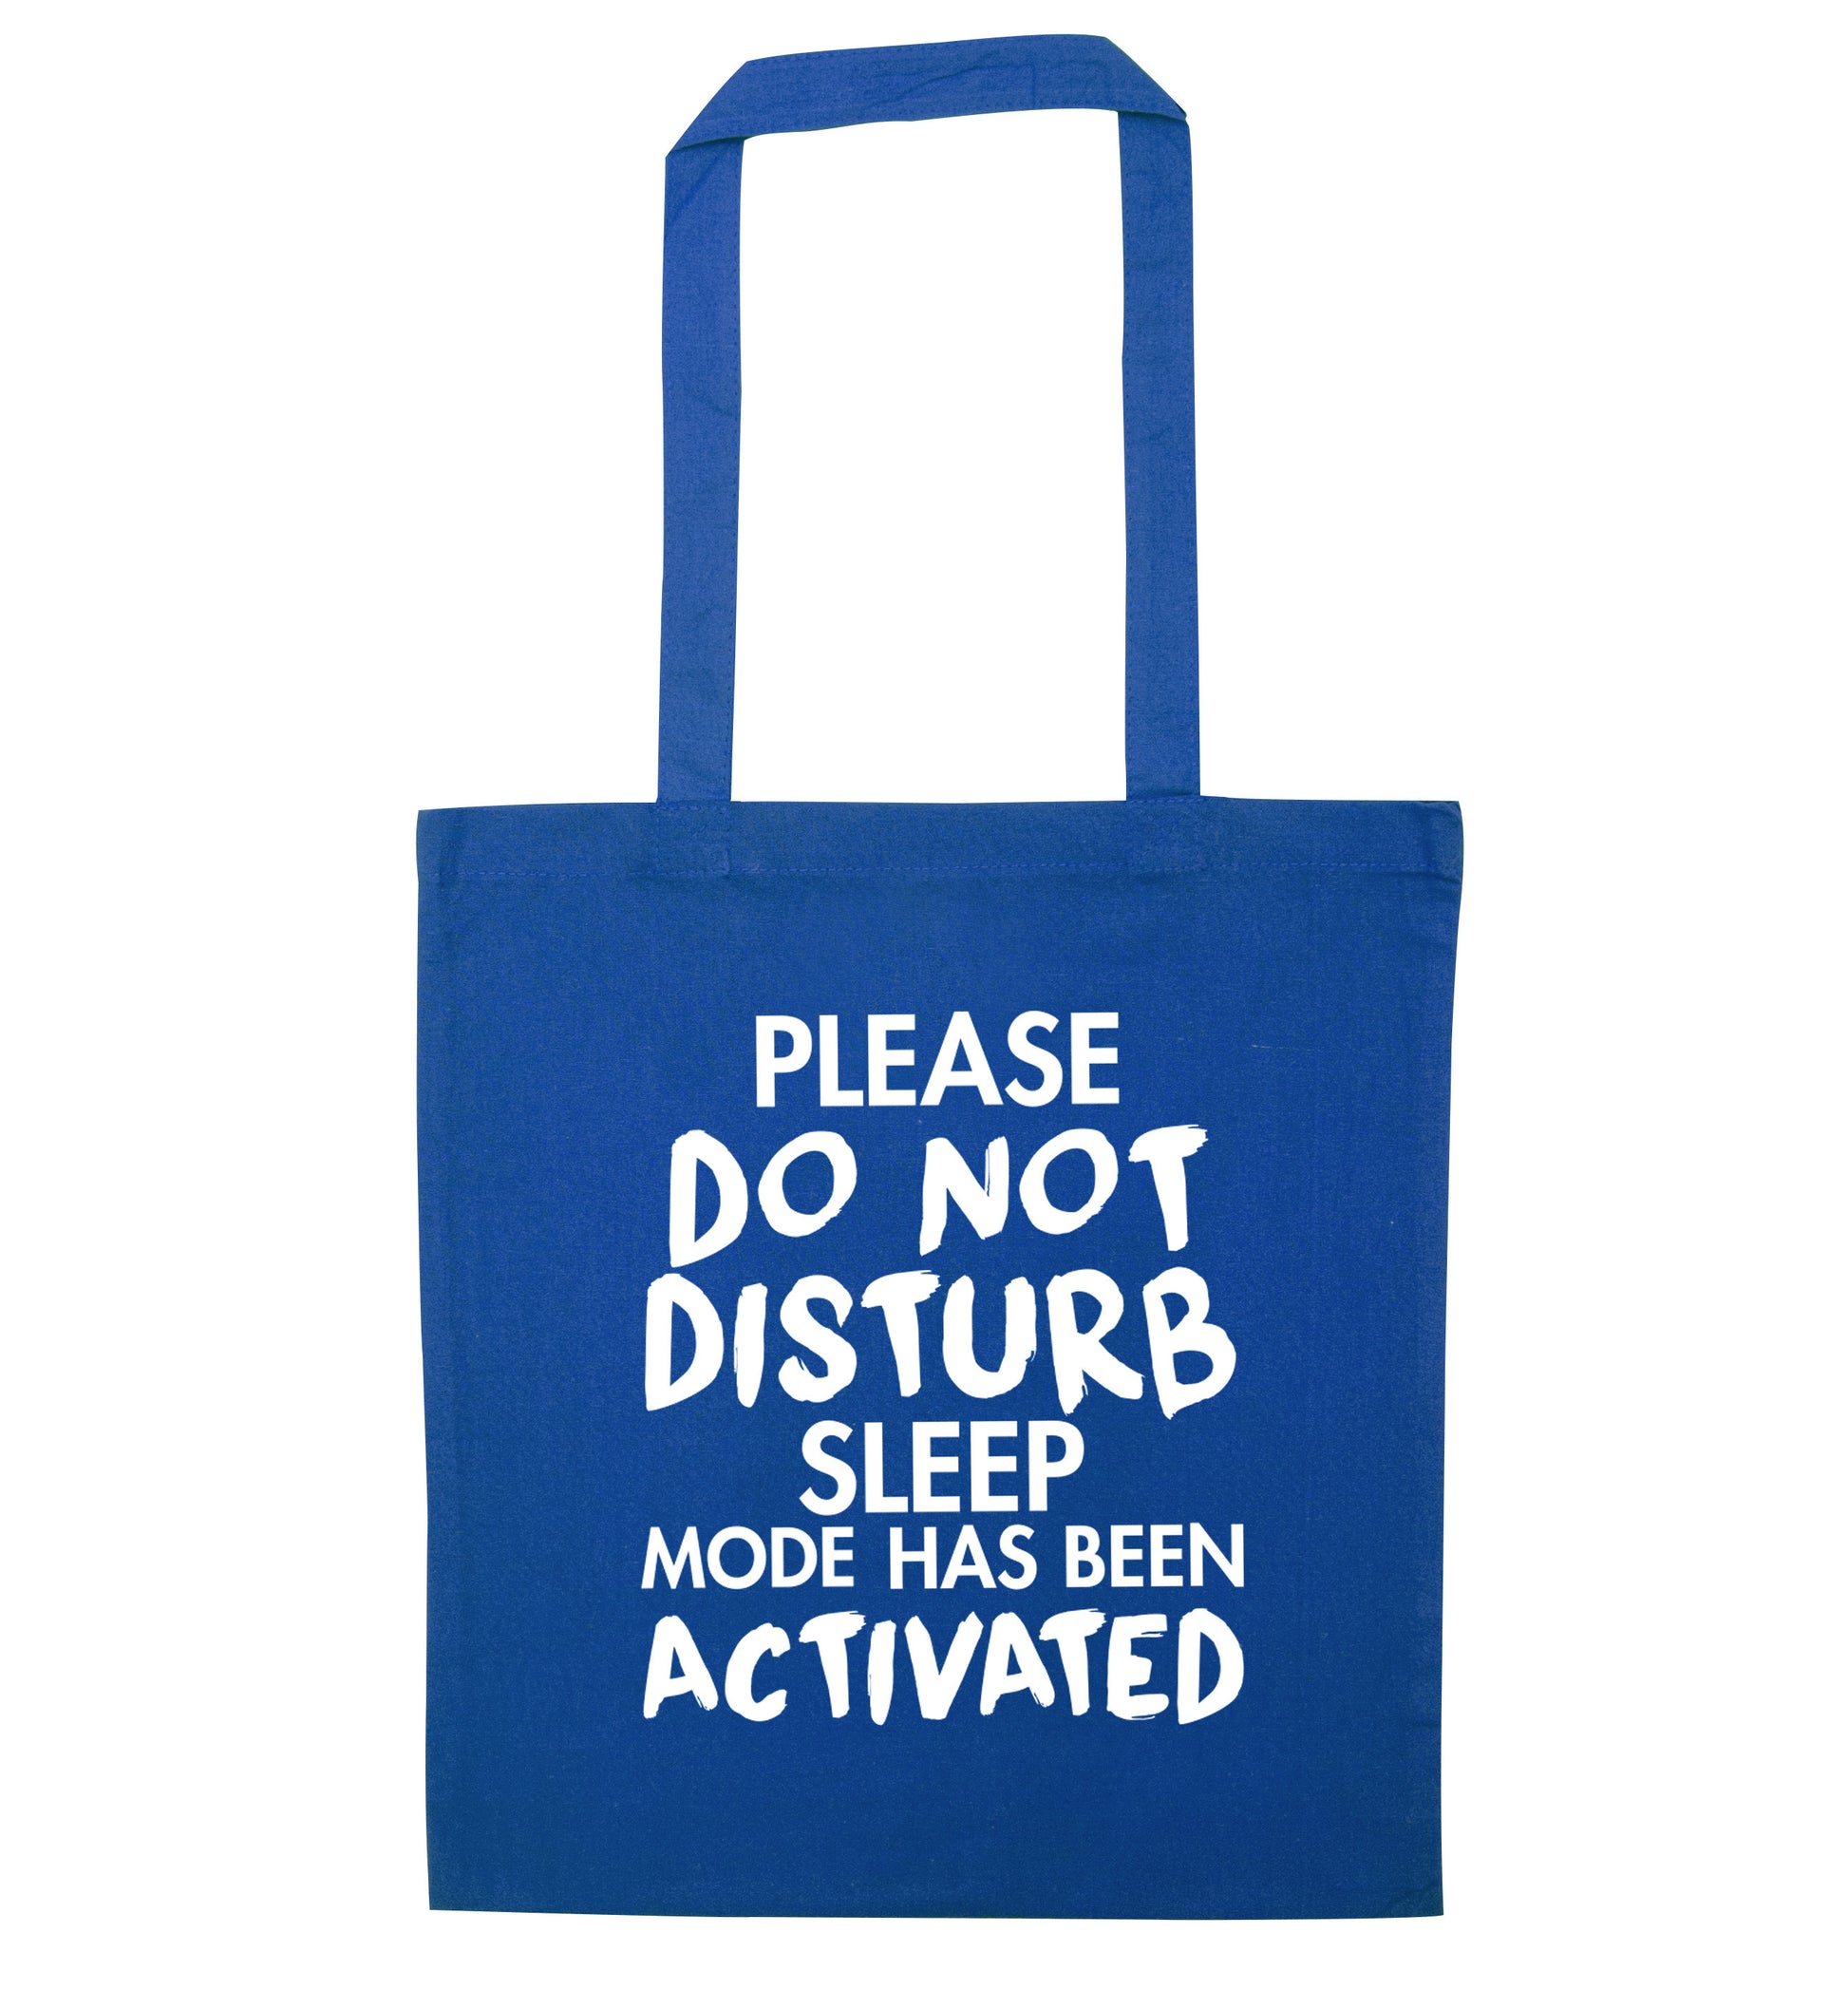 Please do not disturb sleeping mode has been activated blue tote bag